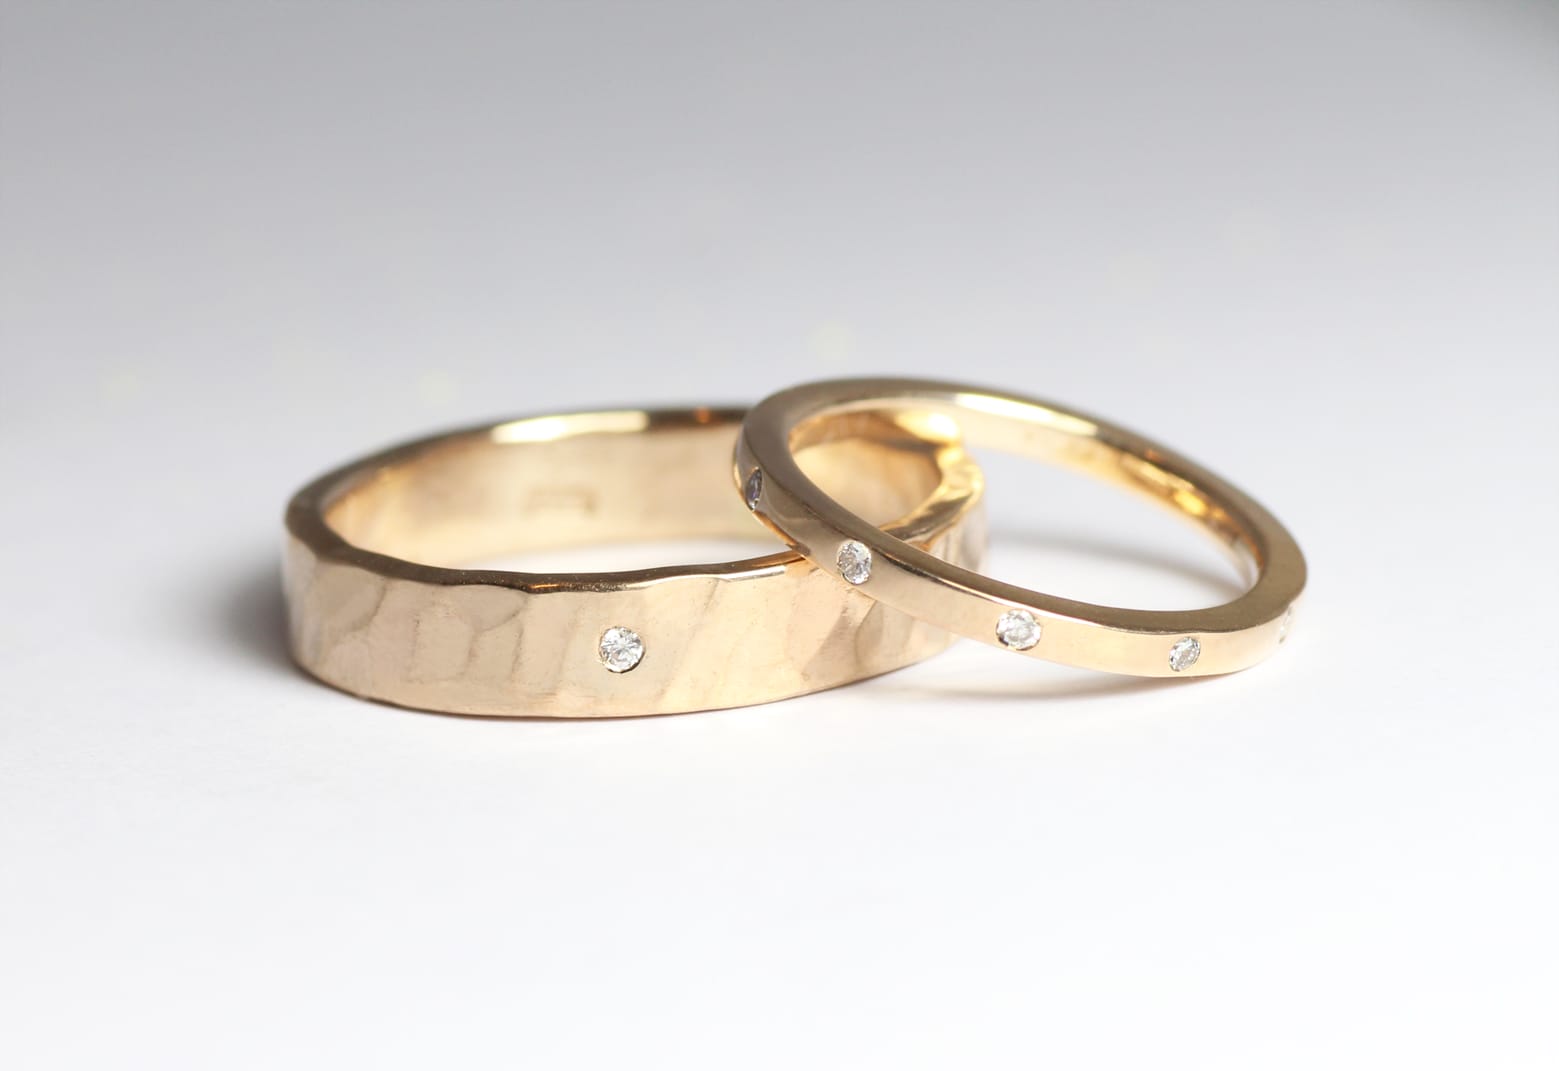 18ct Fairtrade gold wedding band set with diamonds by Zoe Pook Jewellery